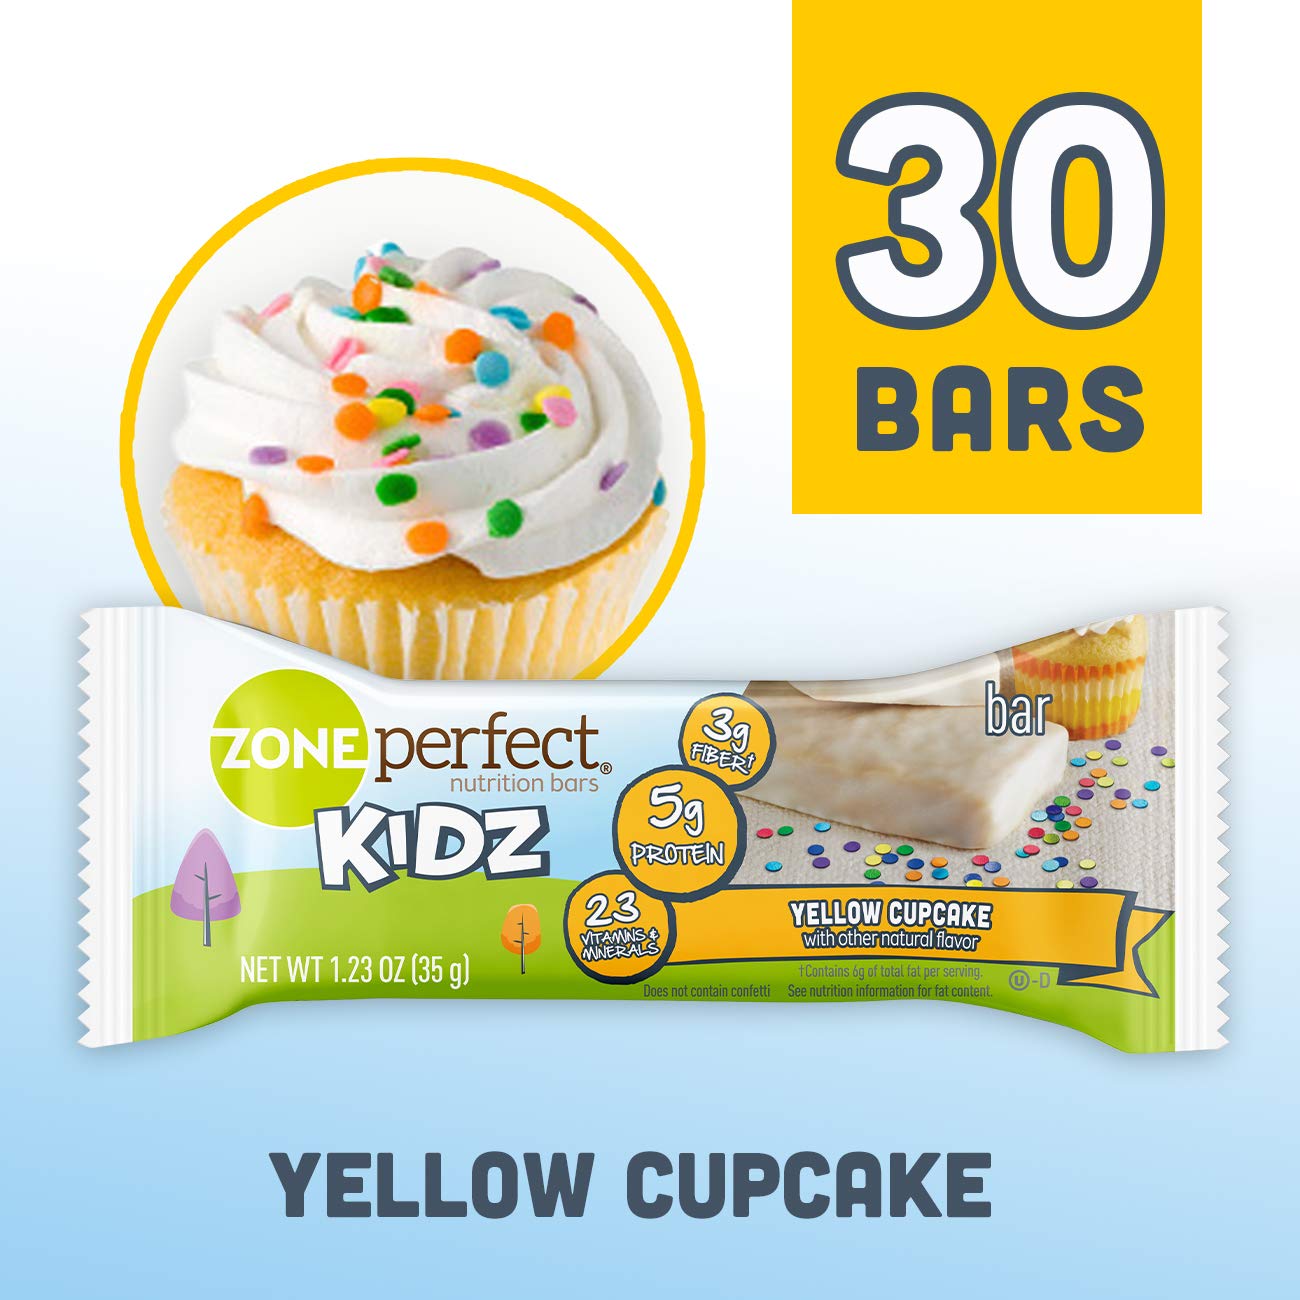 ZonePerfect Kidz Nutrition Bars, No Artificial Flavors or Colors, Yellow Cupcake